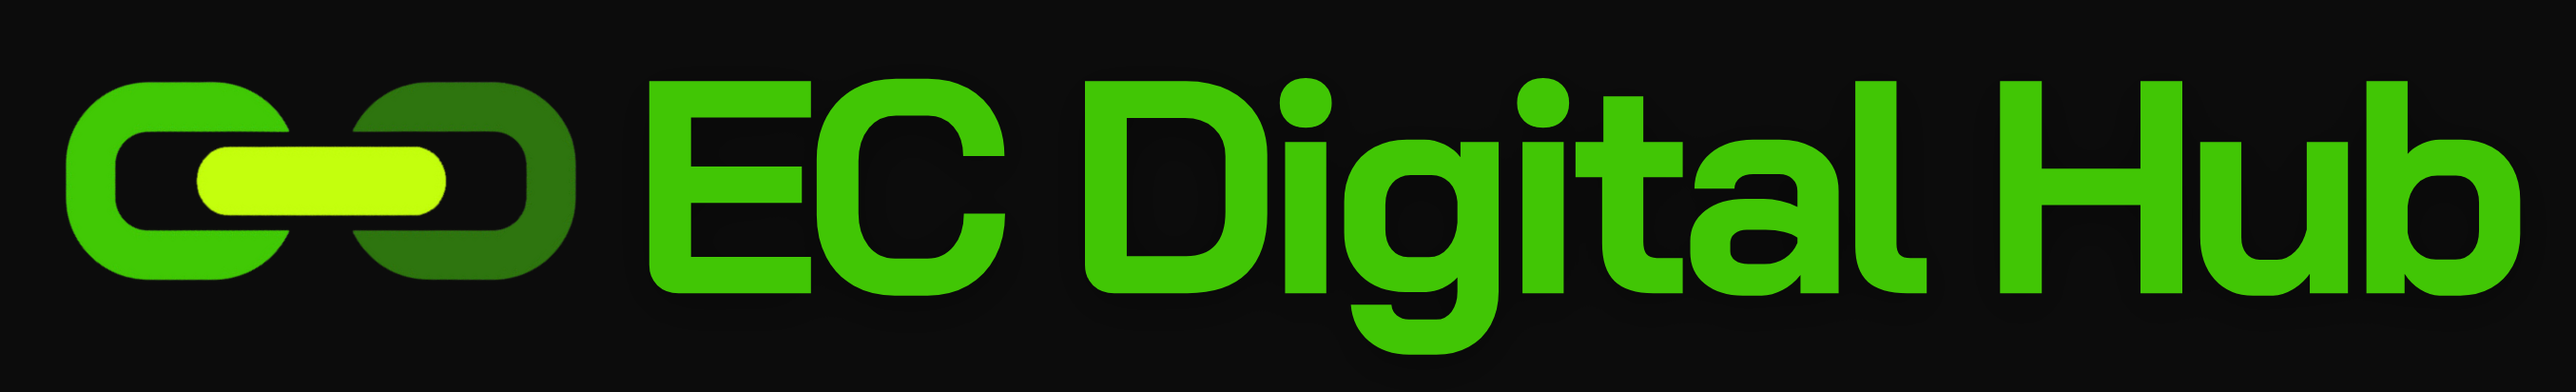 Logo of EC Digital Hub with green and black color scheme, featuring a stylized link symbol.